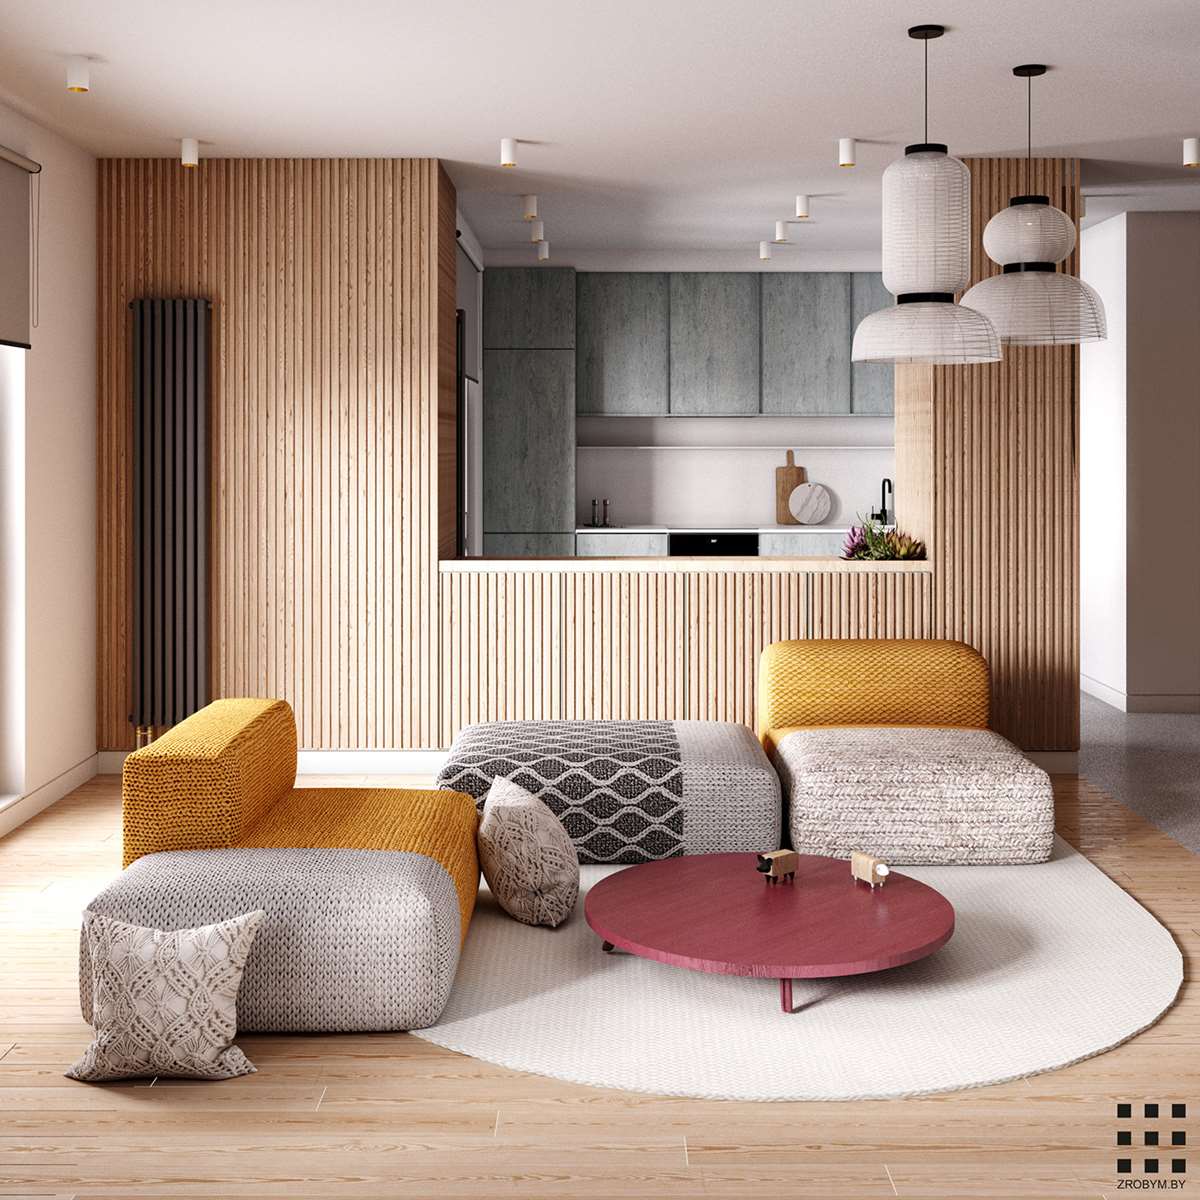 Knitted Flat Apartment Interiors by ZROBYM Architects